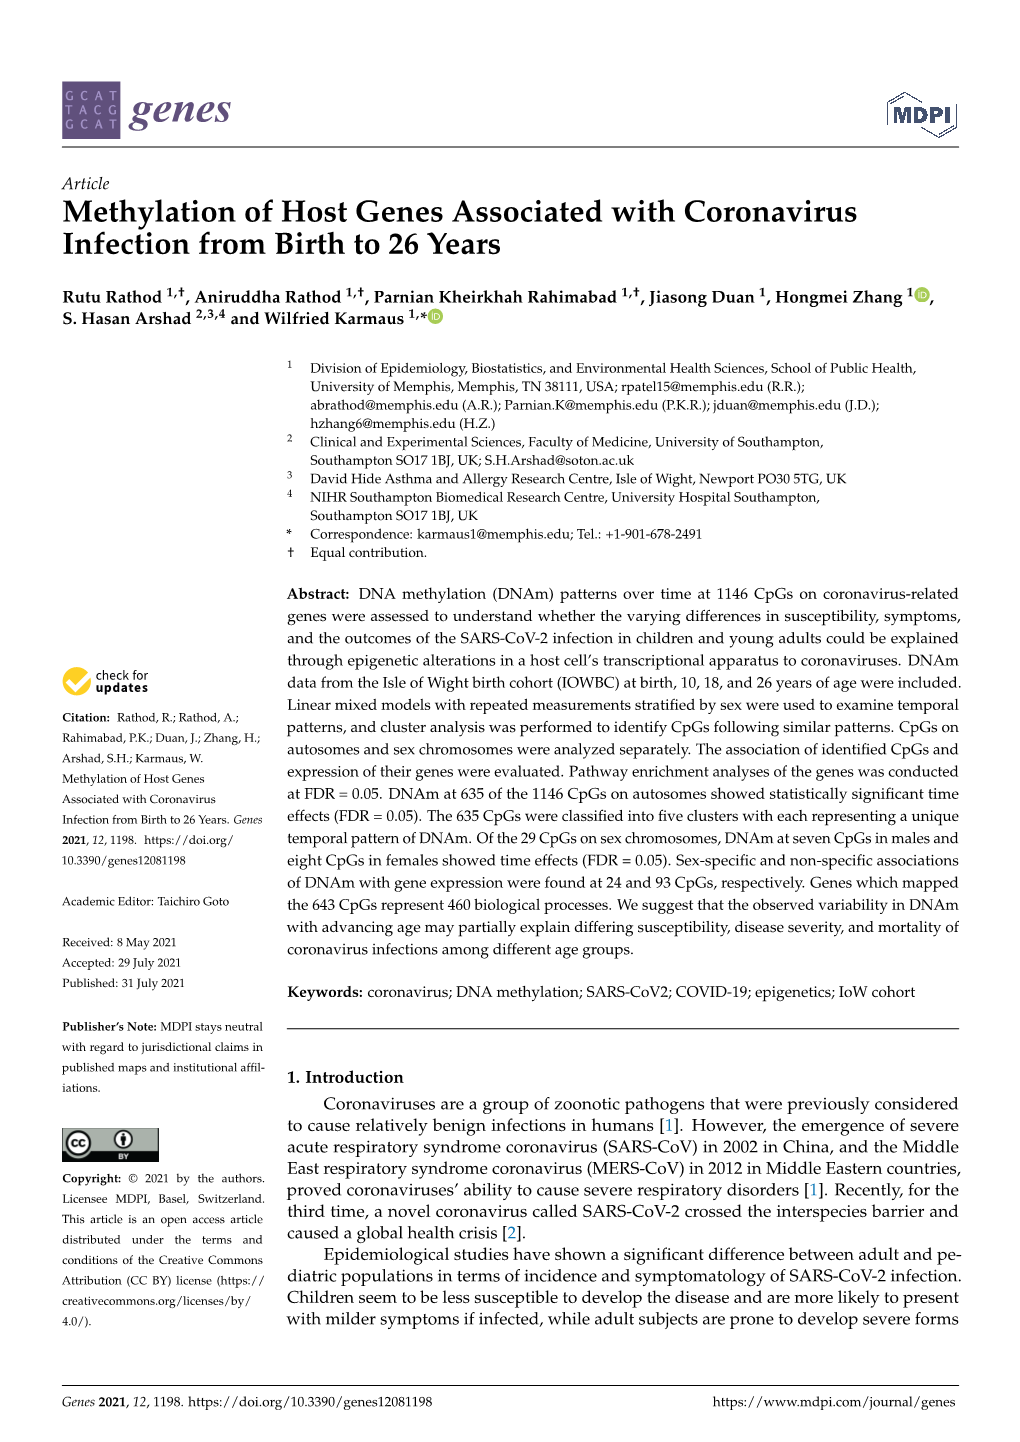 Methylation of Host Genes Associated with Coronavirus Infection from Birth to 26 Years